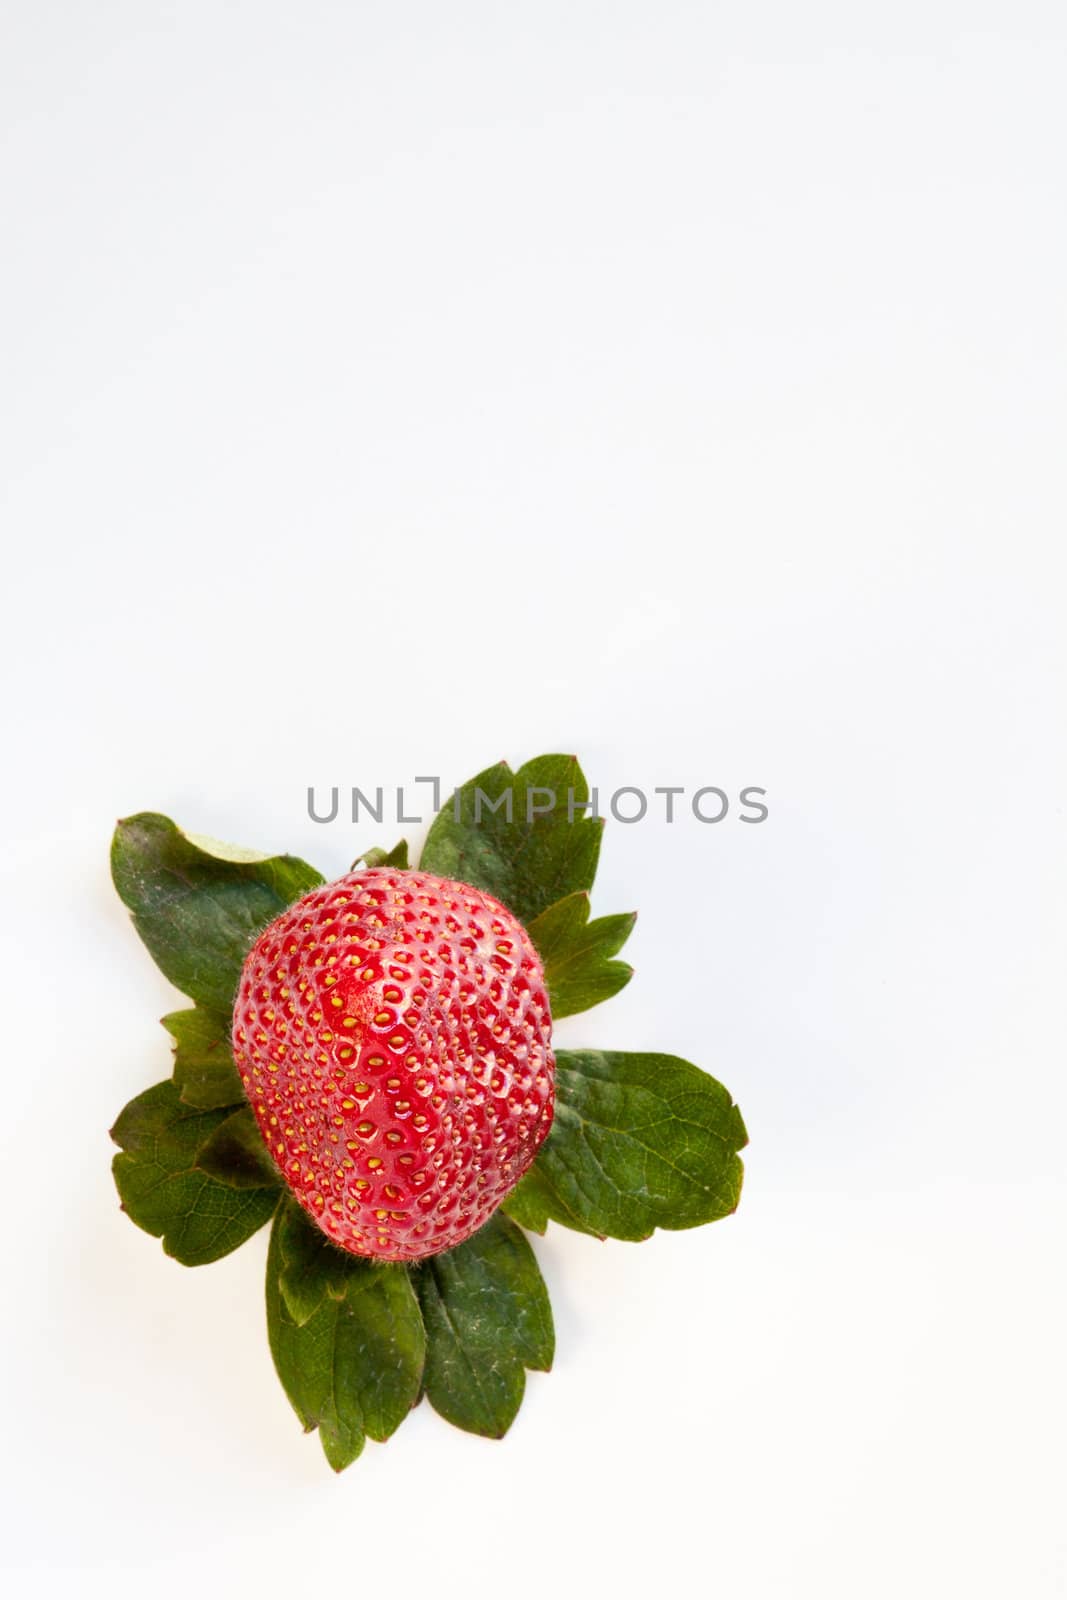 Red strawberry surrounded by green leaves isolated on white.